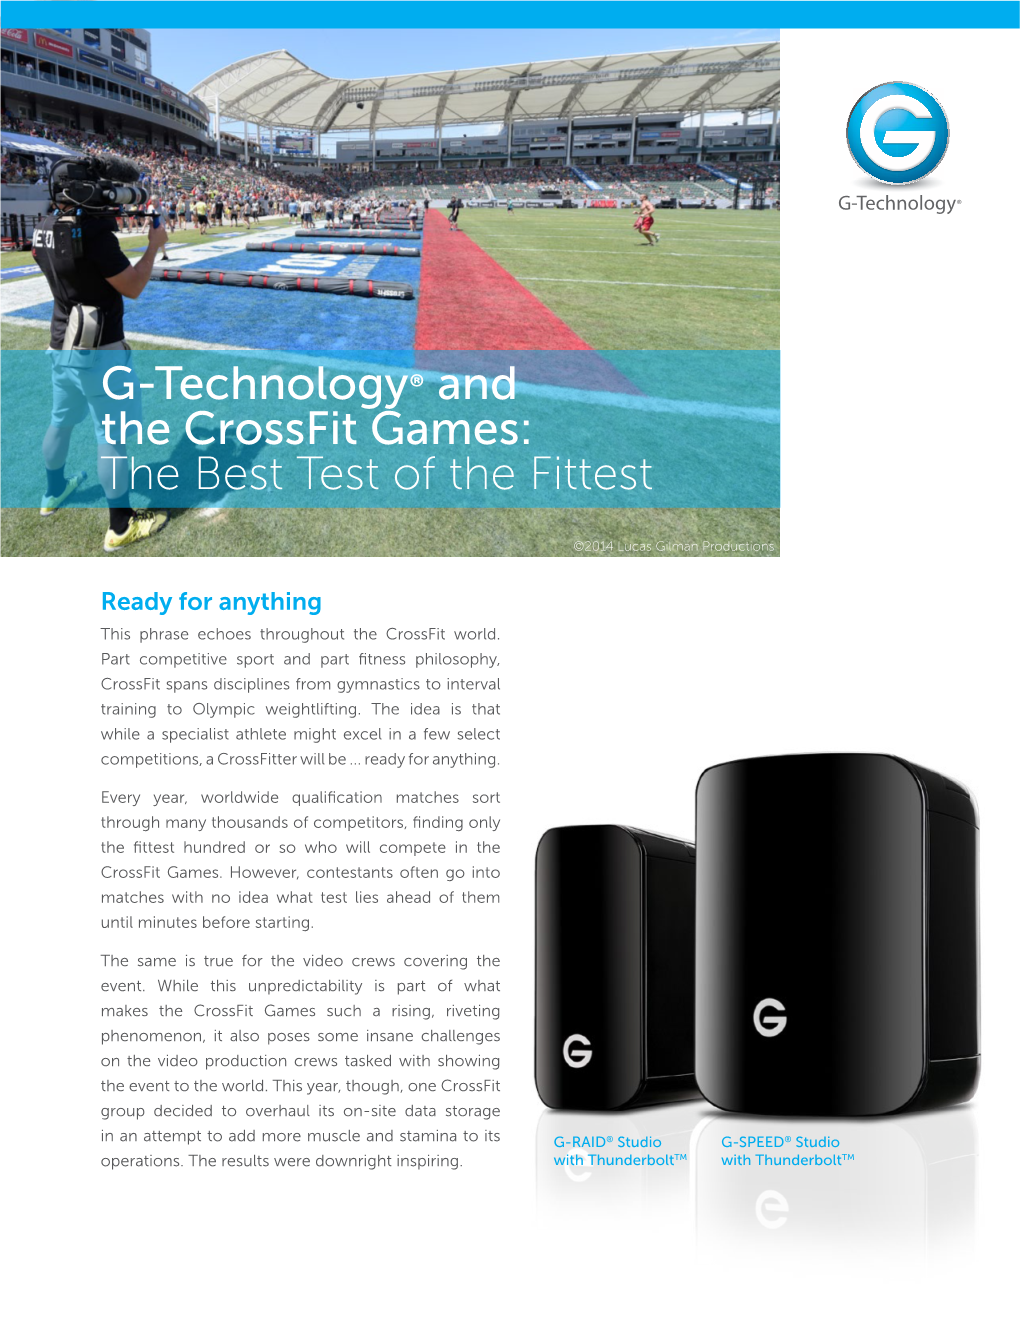 G-Technology® and the Crossfit Games: the Best Test of the Fittest